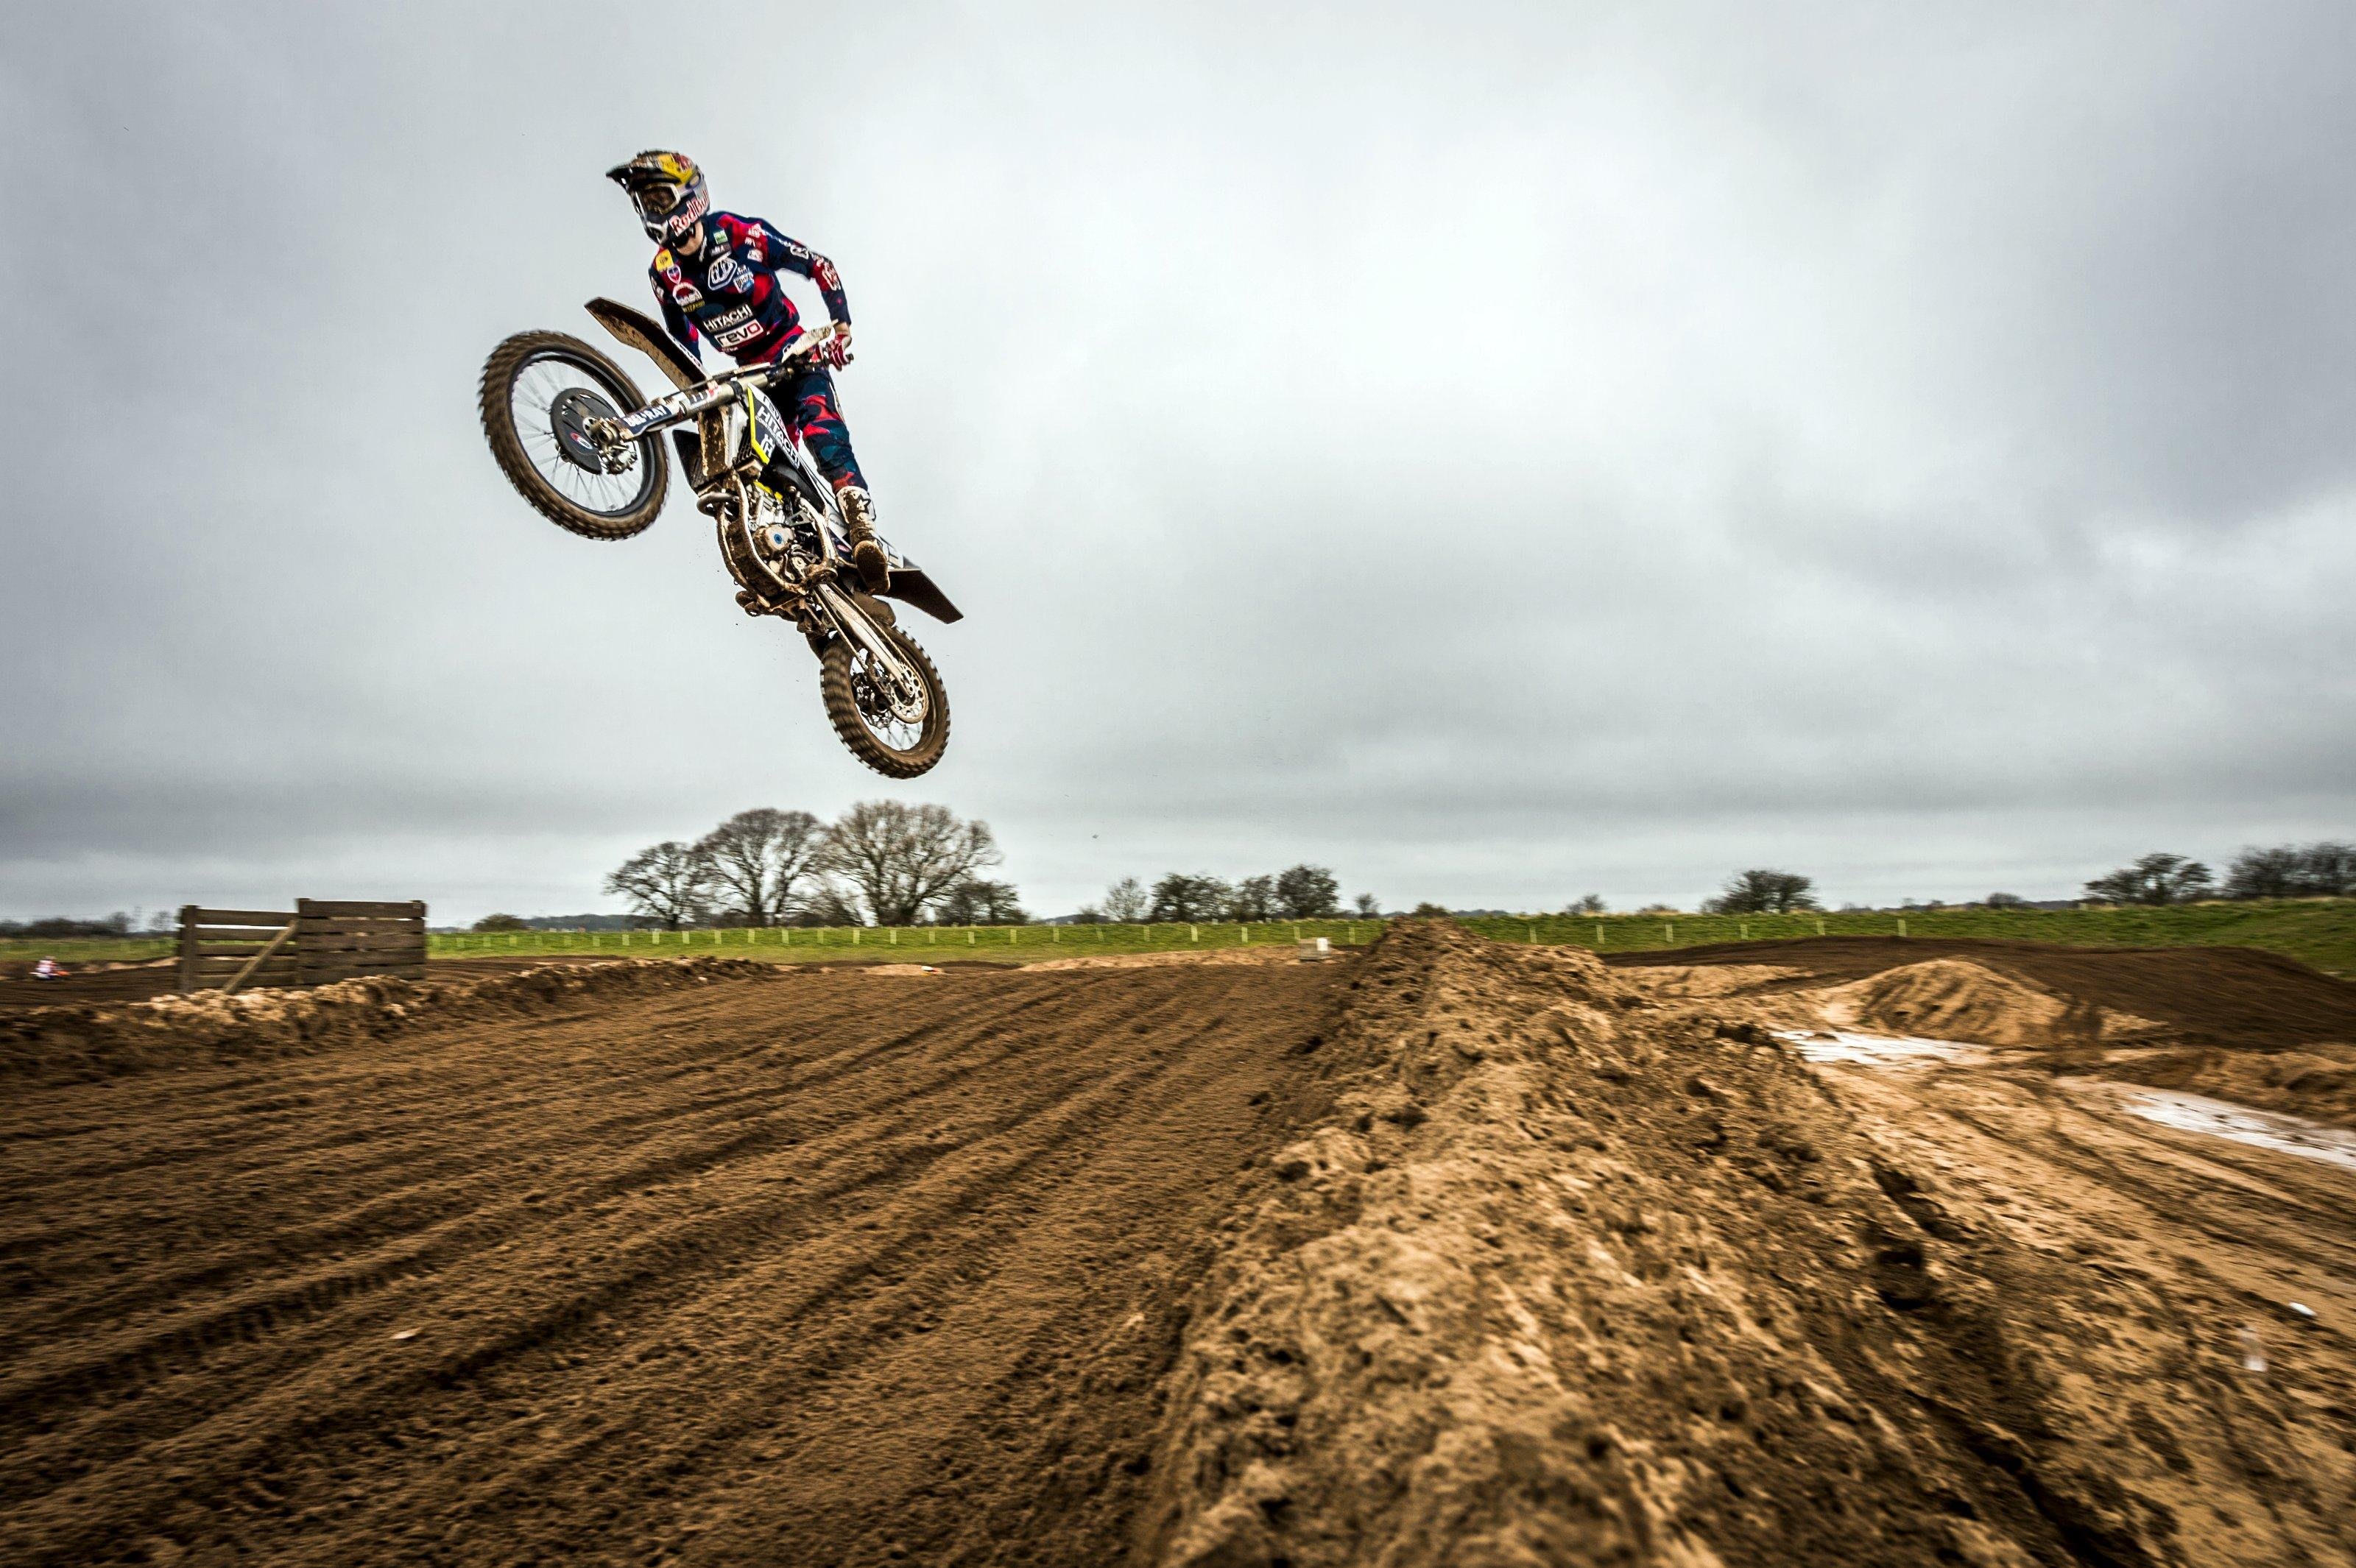 Tips on How to Photograph Motocross